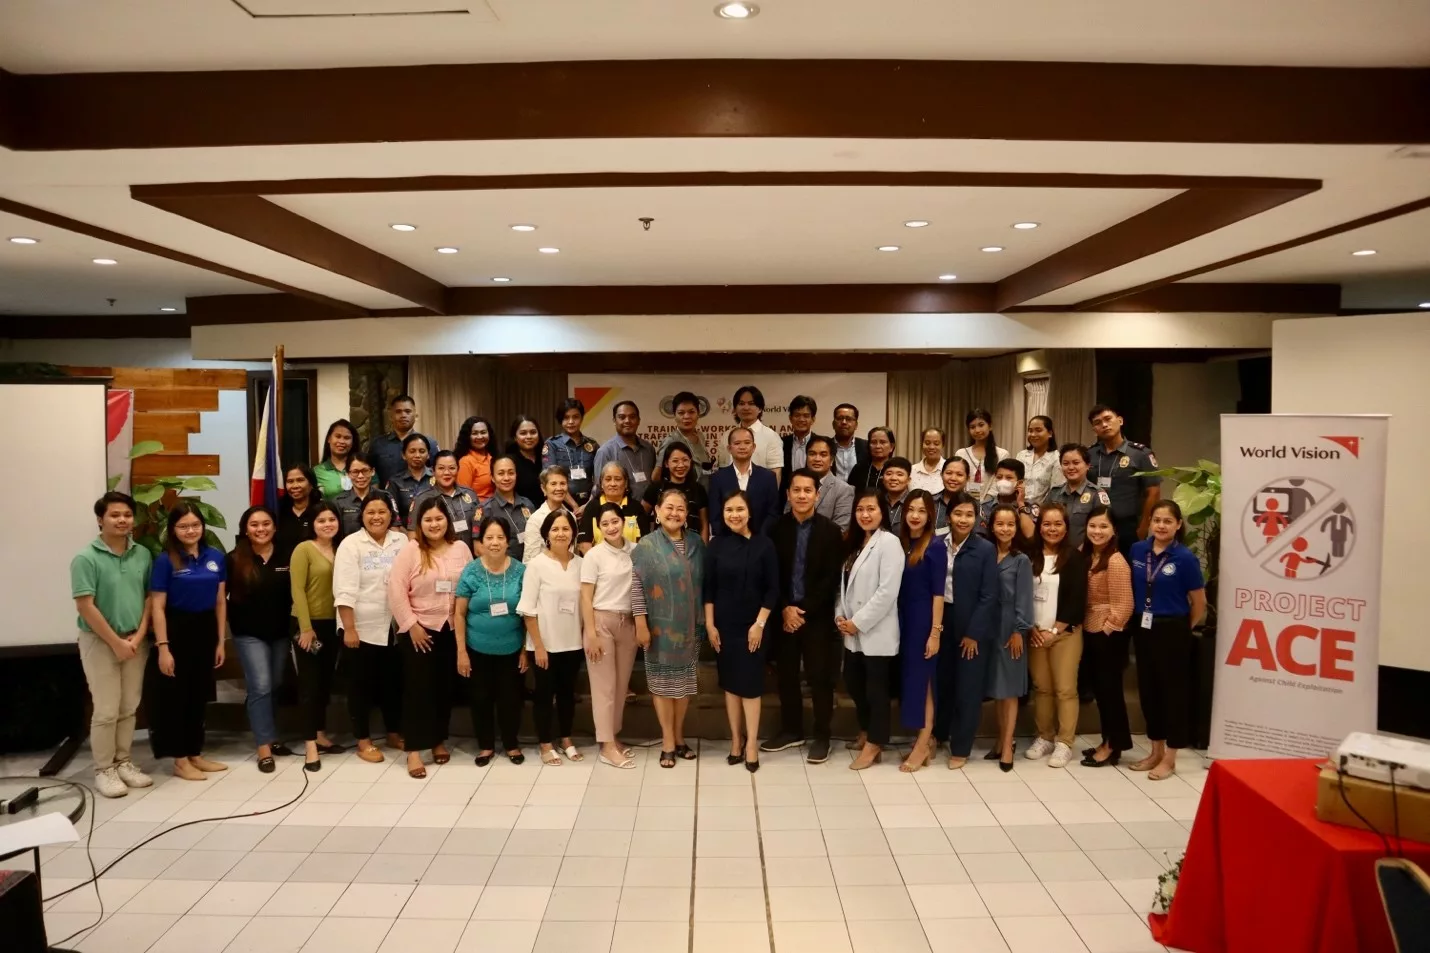 World Vision Project ACE, DOJ – 10, celebrate WDAT by training service providers on Anti-Trafficking in Persons and Anti-OSAEC laws